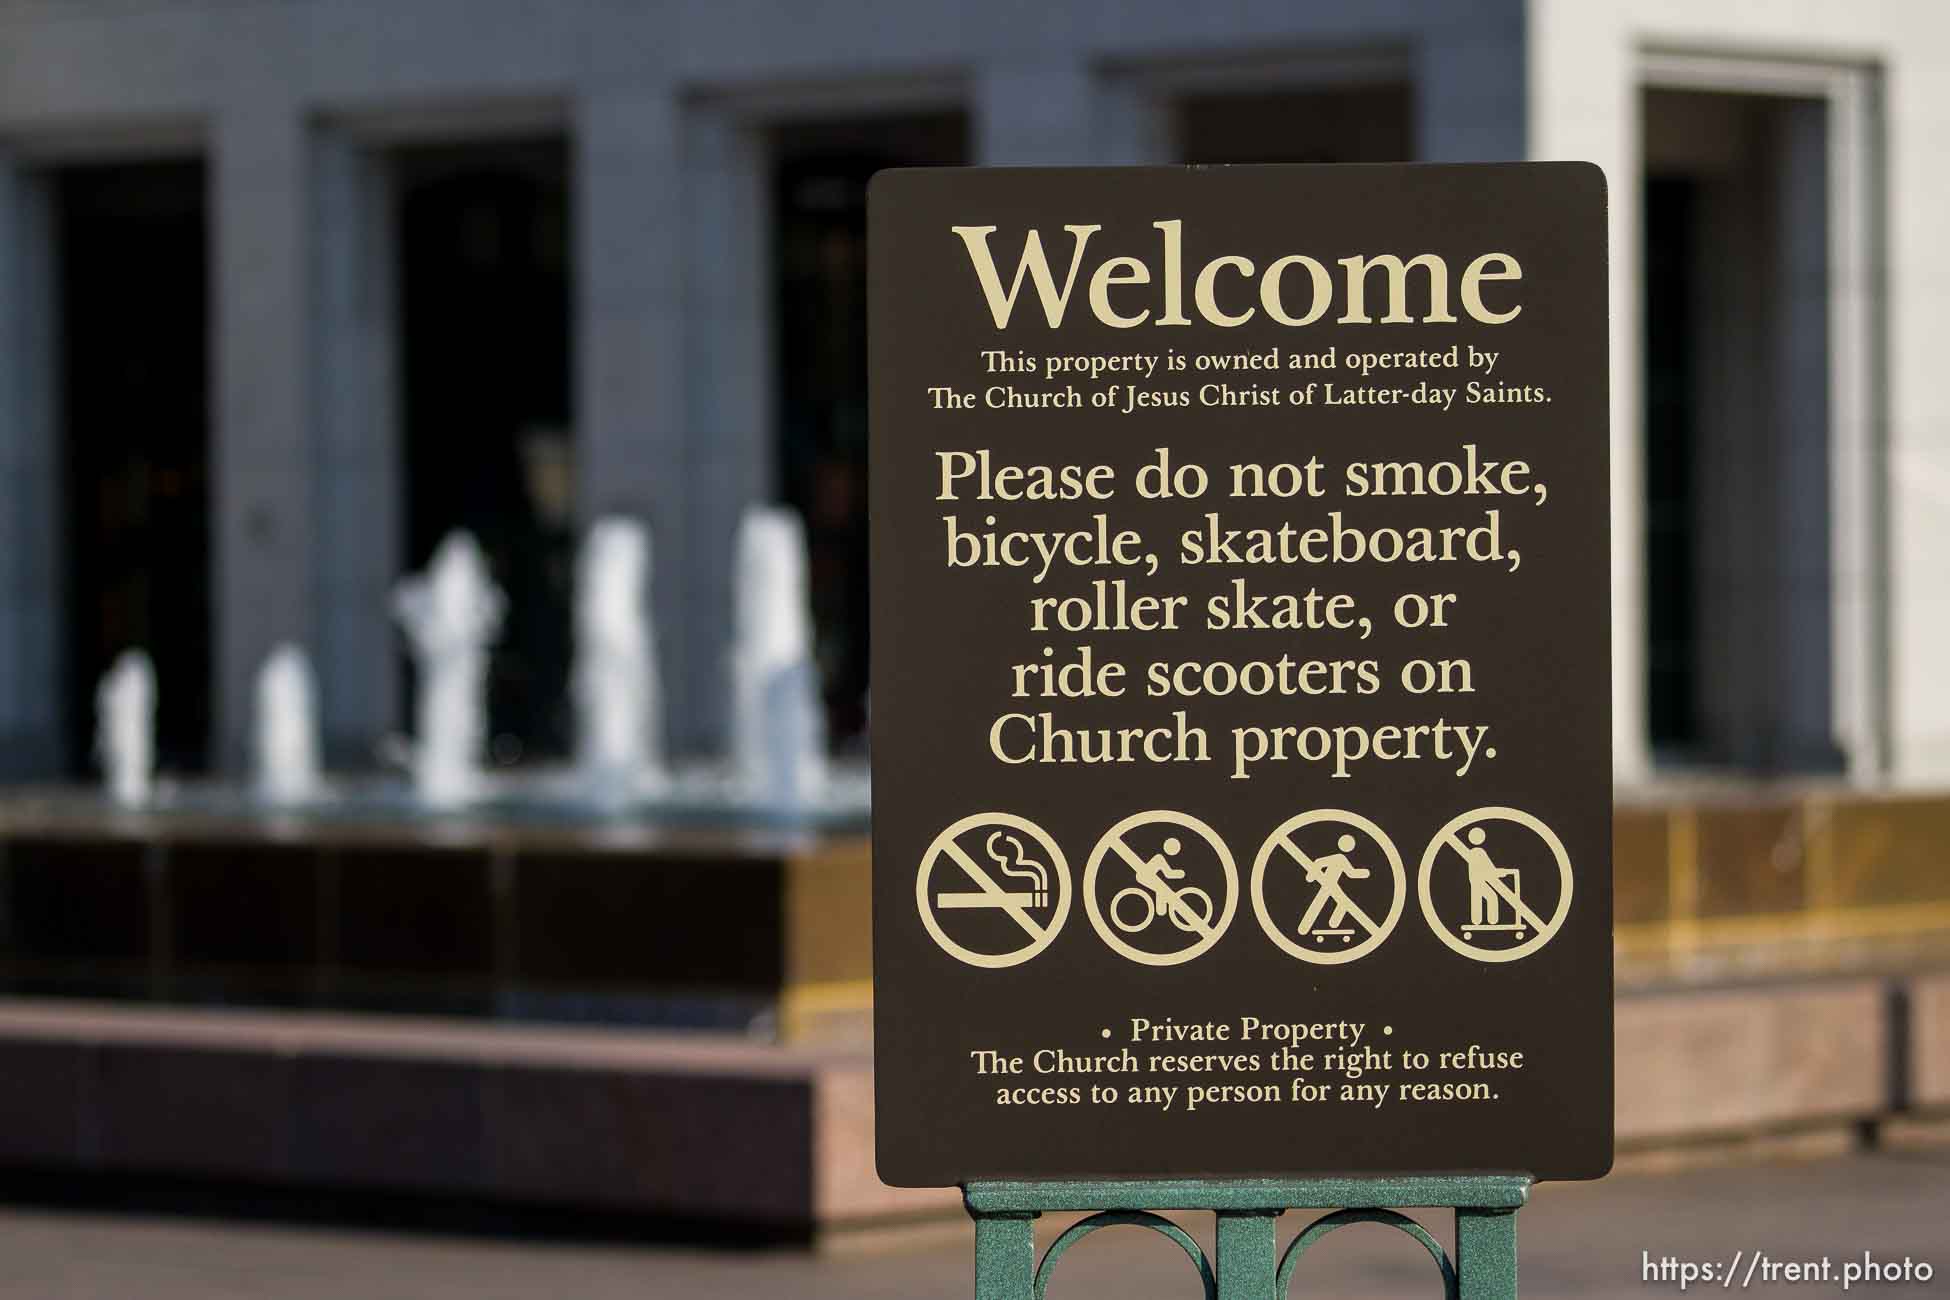 Welcome please do not smoke, bicycle, skateboard, roller skate, ride scooters on Church property
in Salt Lake City on Tuesday, Dec. 12, 2023.